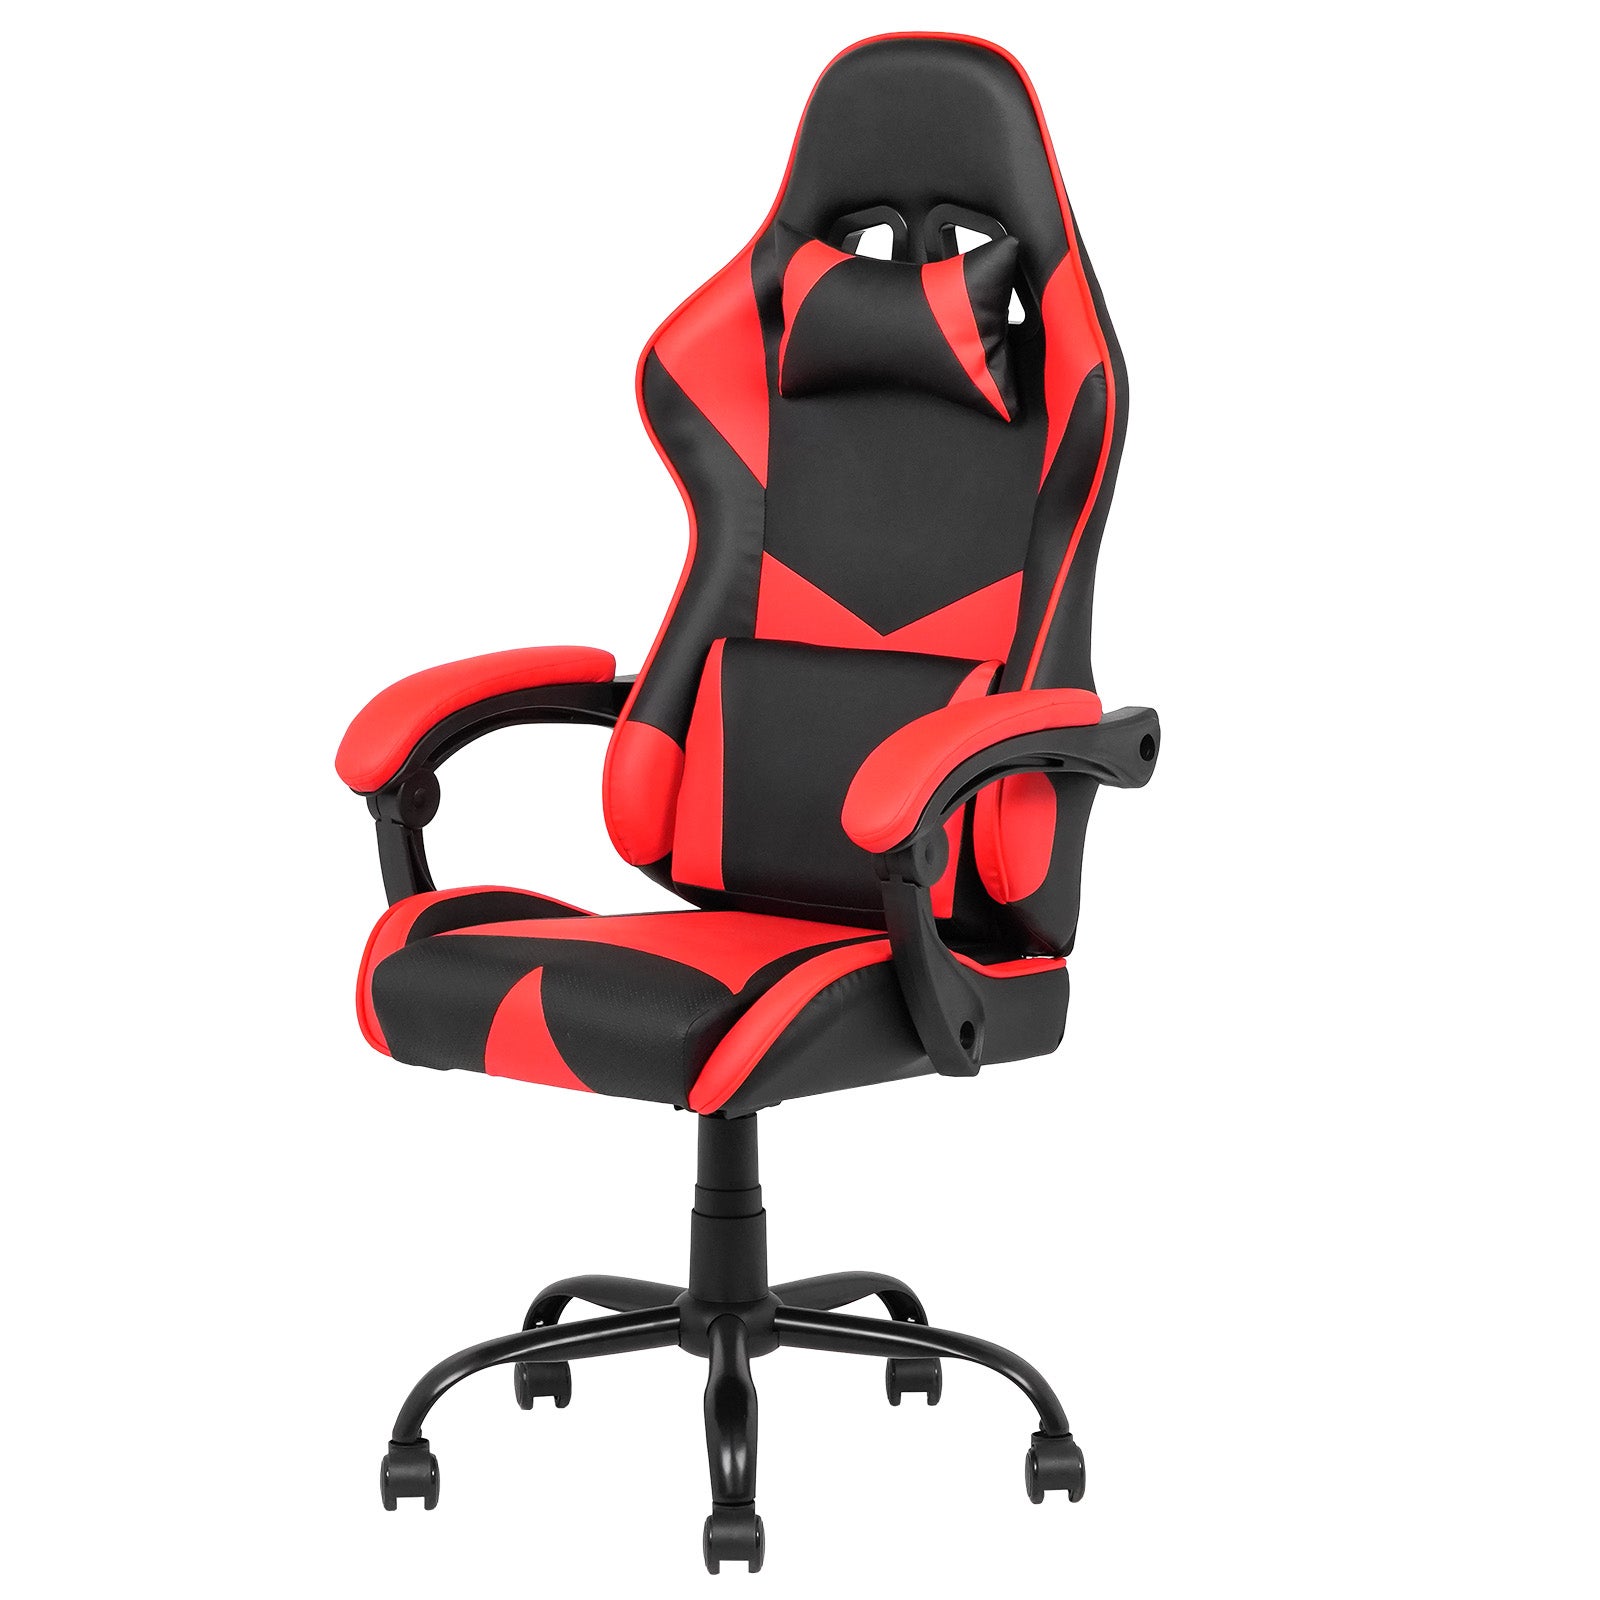 Advwin Gaming Chair Racing Recliner Ergonomic Reclining Office Chair Executive Computer Seat Red